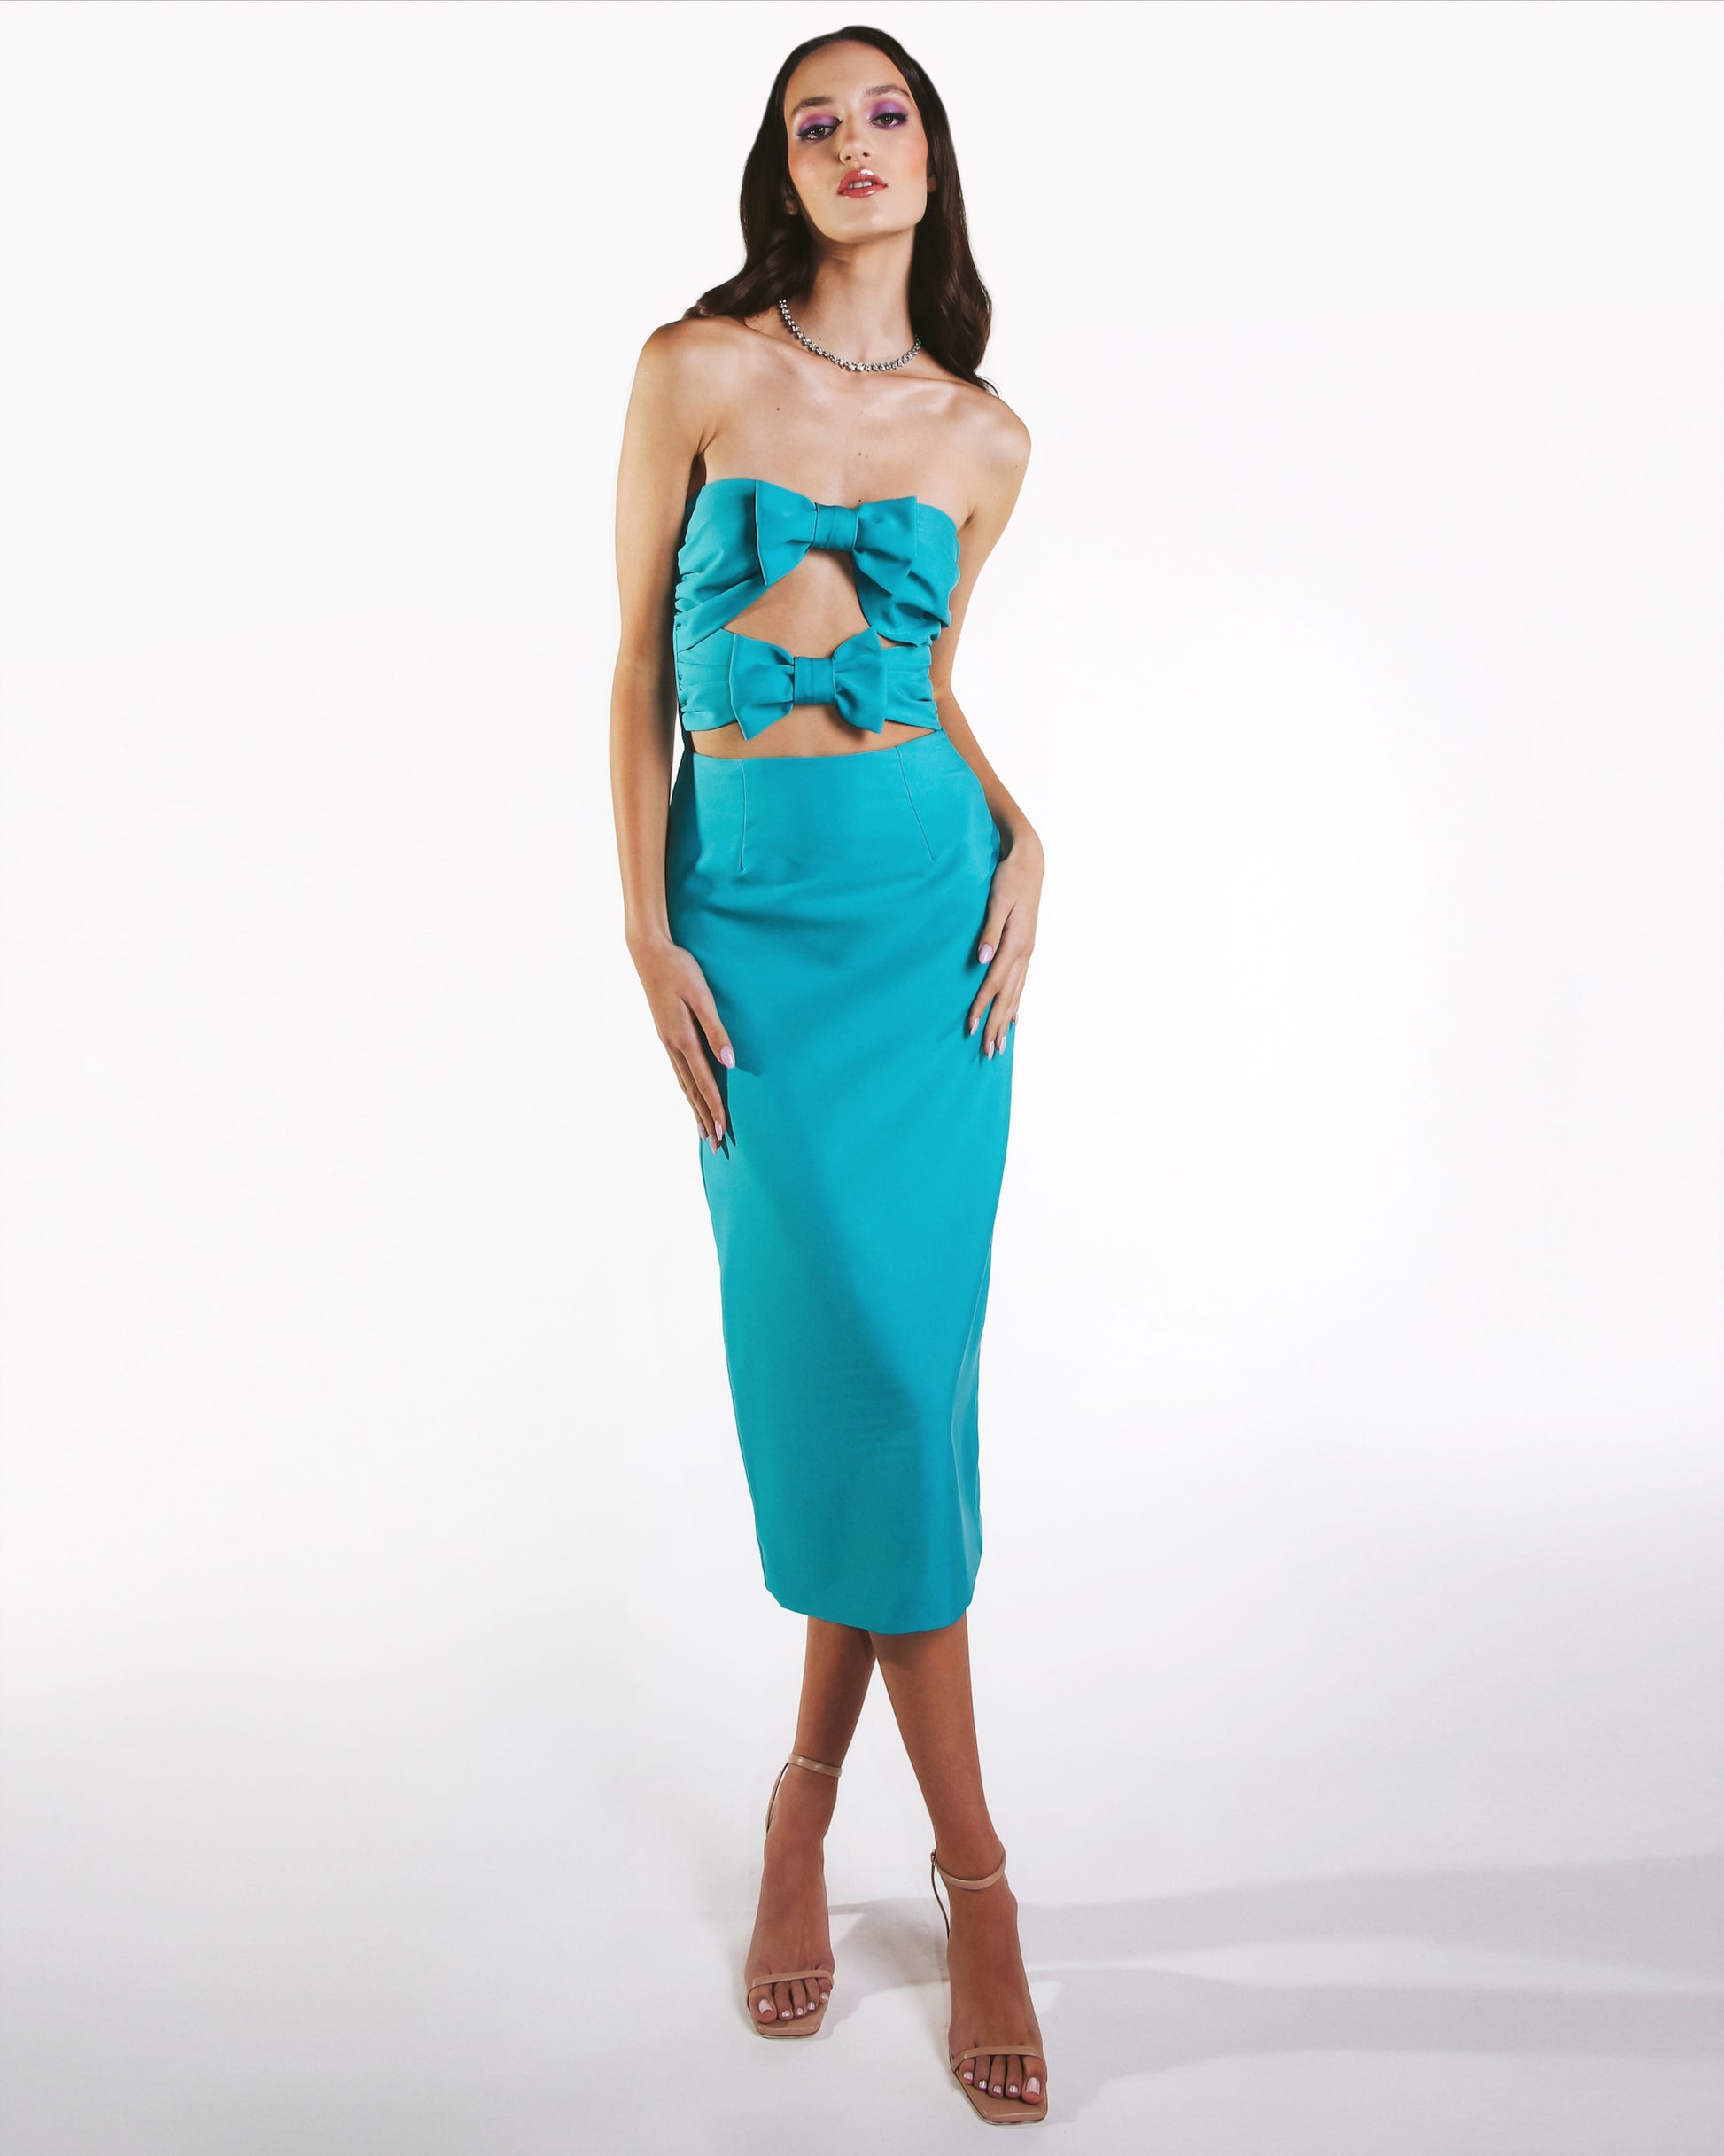 IRA by Irini Charalampous, @irathebrand online shop fashionable ready-to-wear womenswear brand dress PENELOPE colour turquoise high heels Cyprus Greece